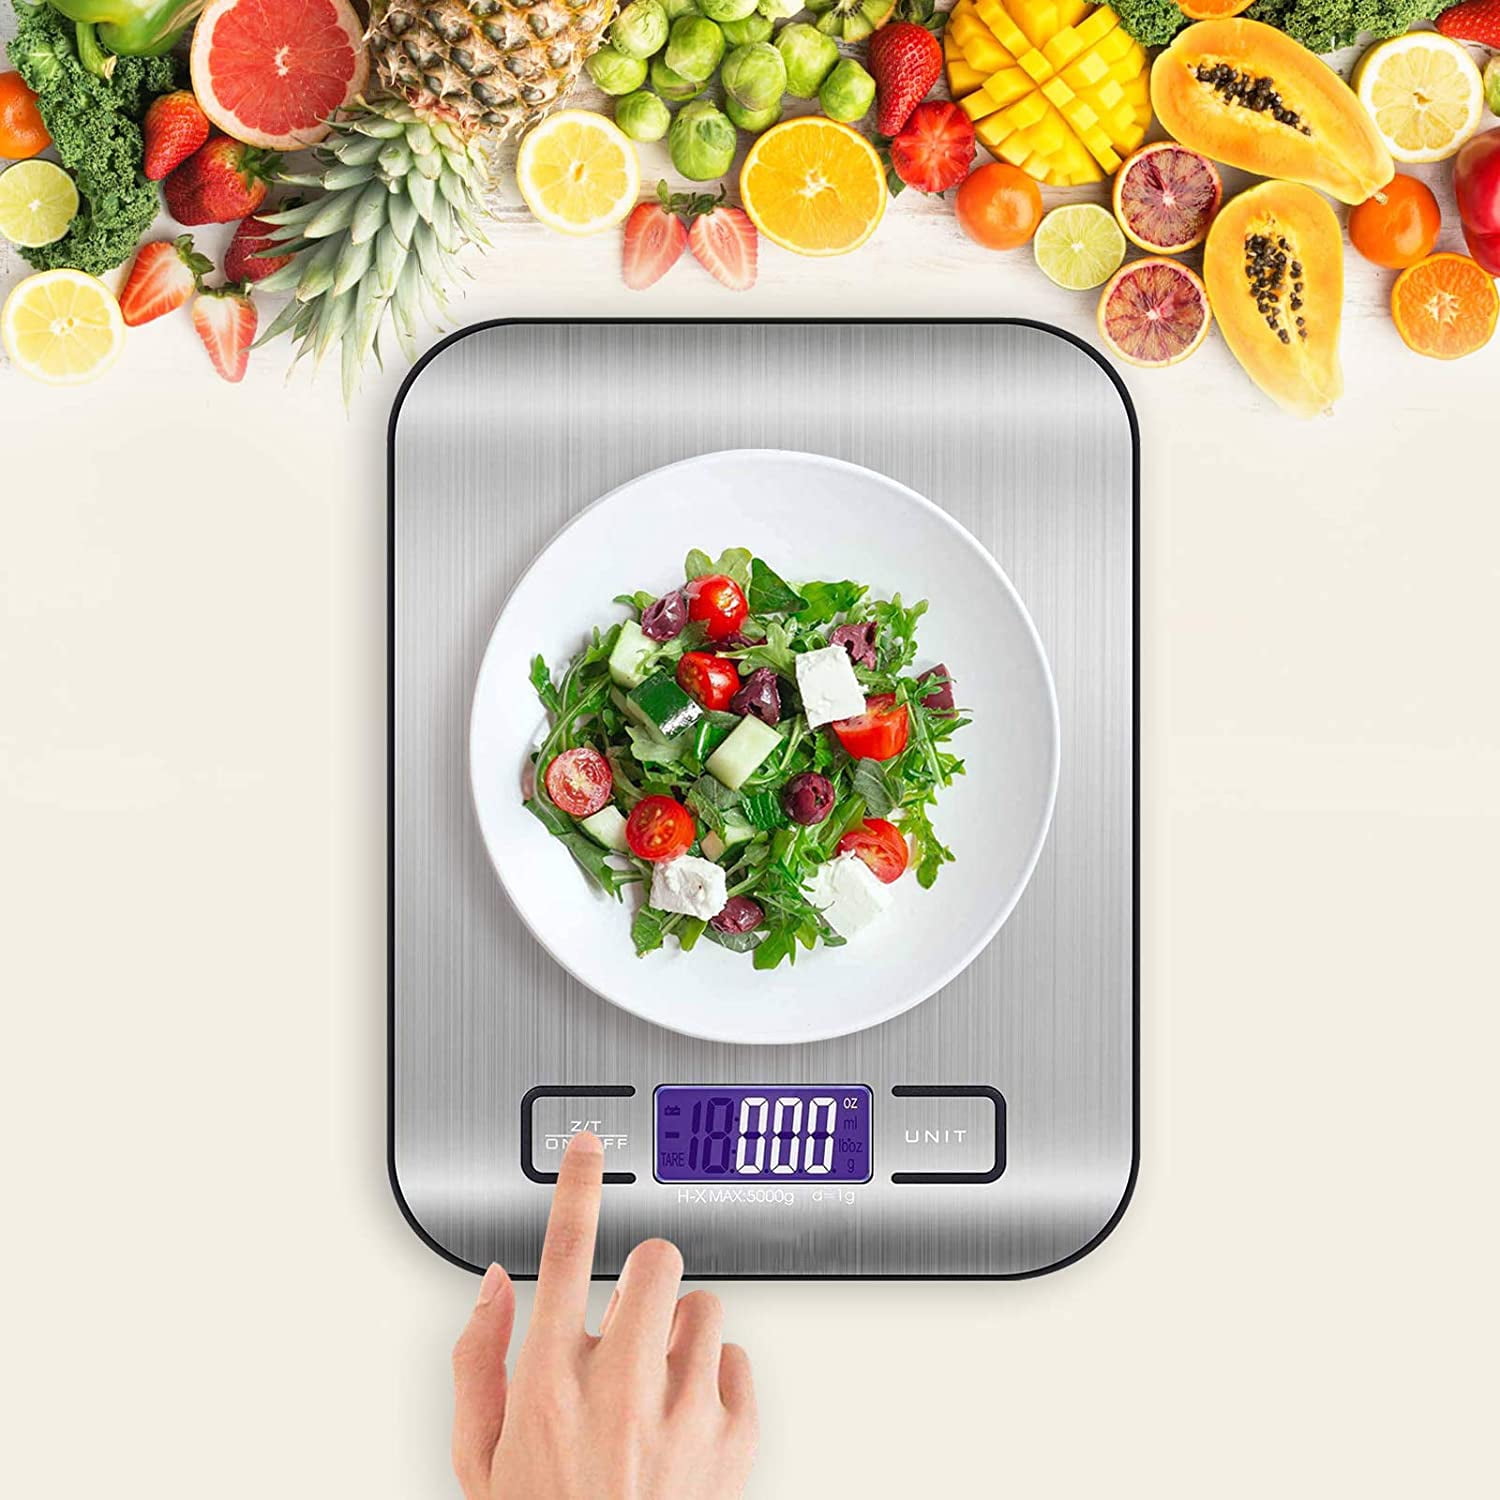 CO-Z 11lb / 5kg Digital Kitchen Food Scale Stainless Steel Platform with LCD